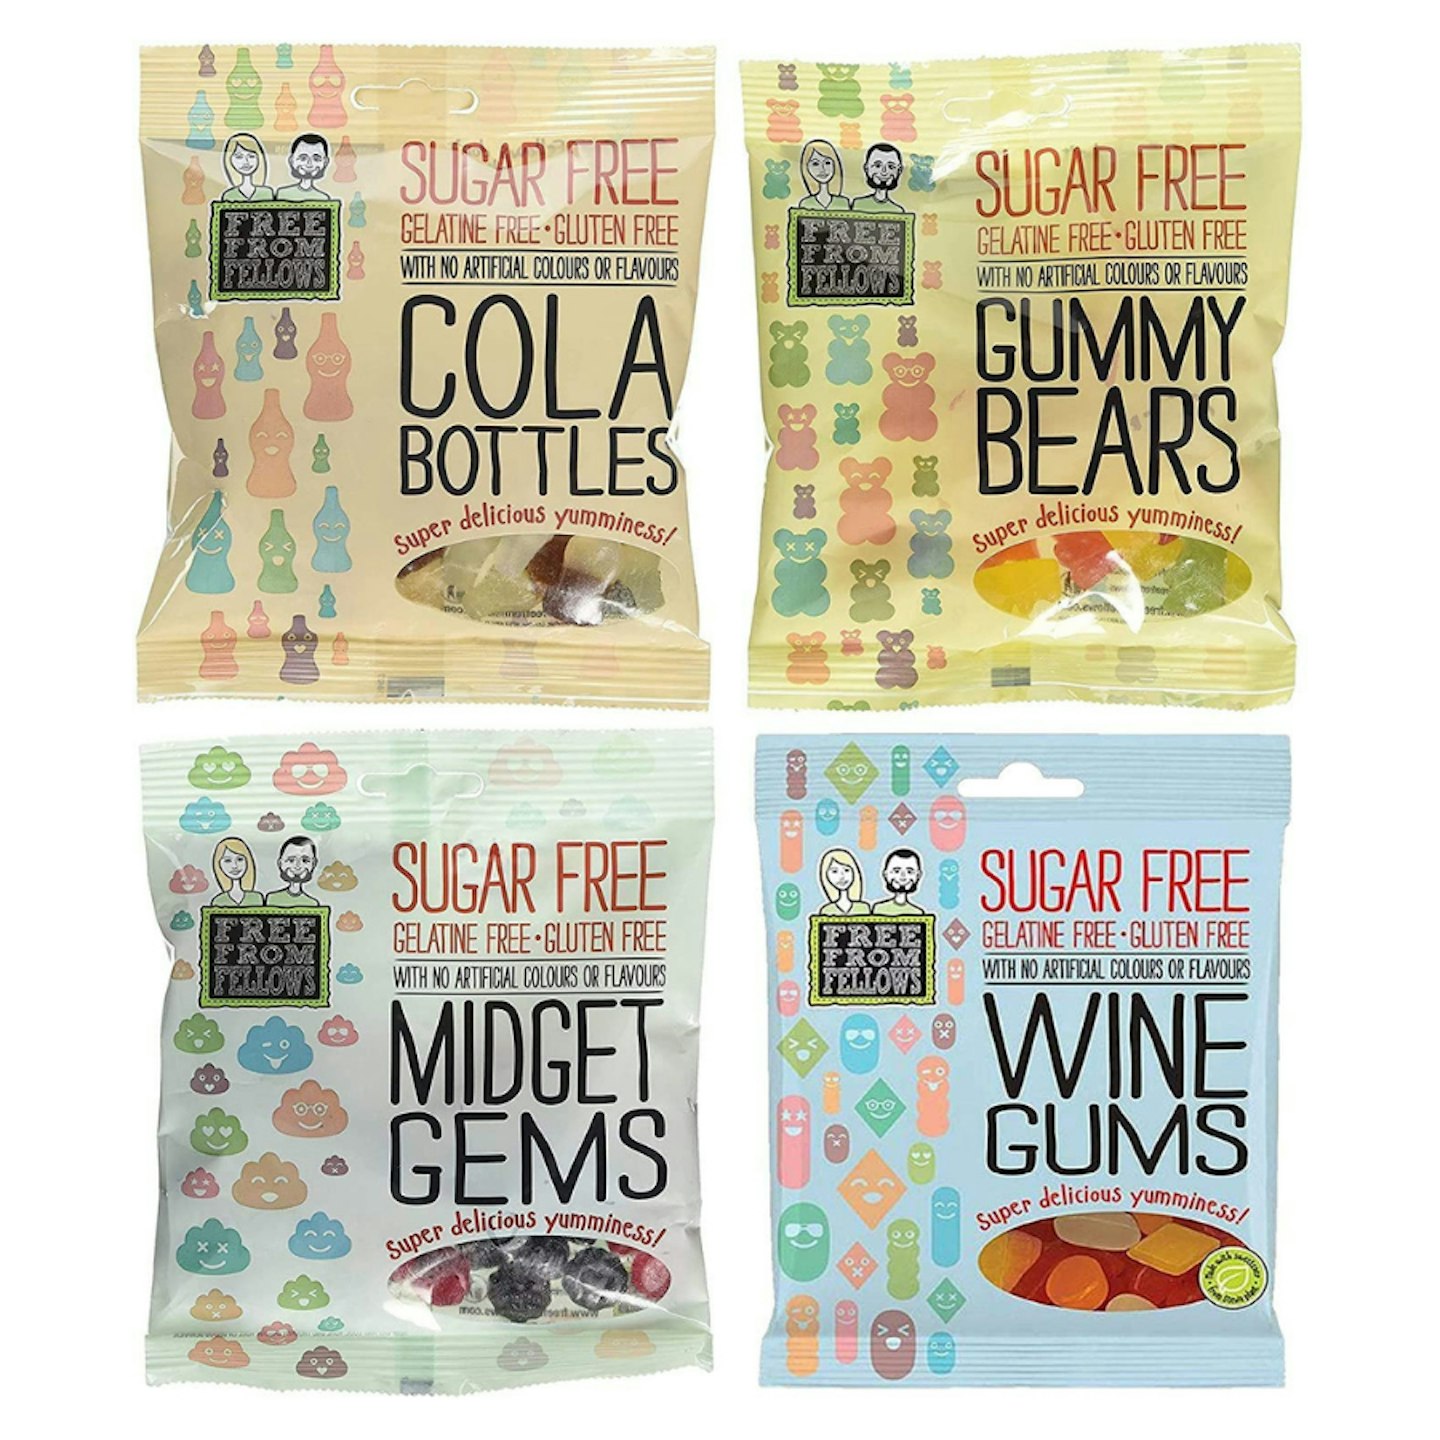 Sugar Free Sweets and Gluten Free Vegan Sweets!